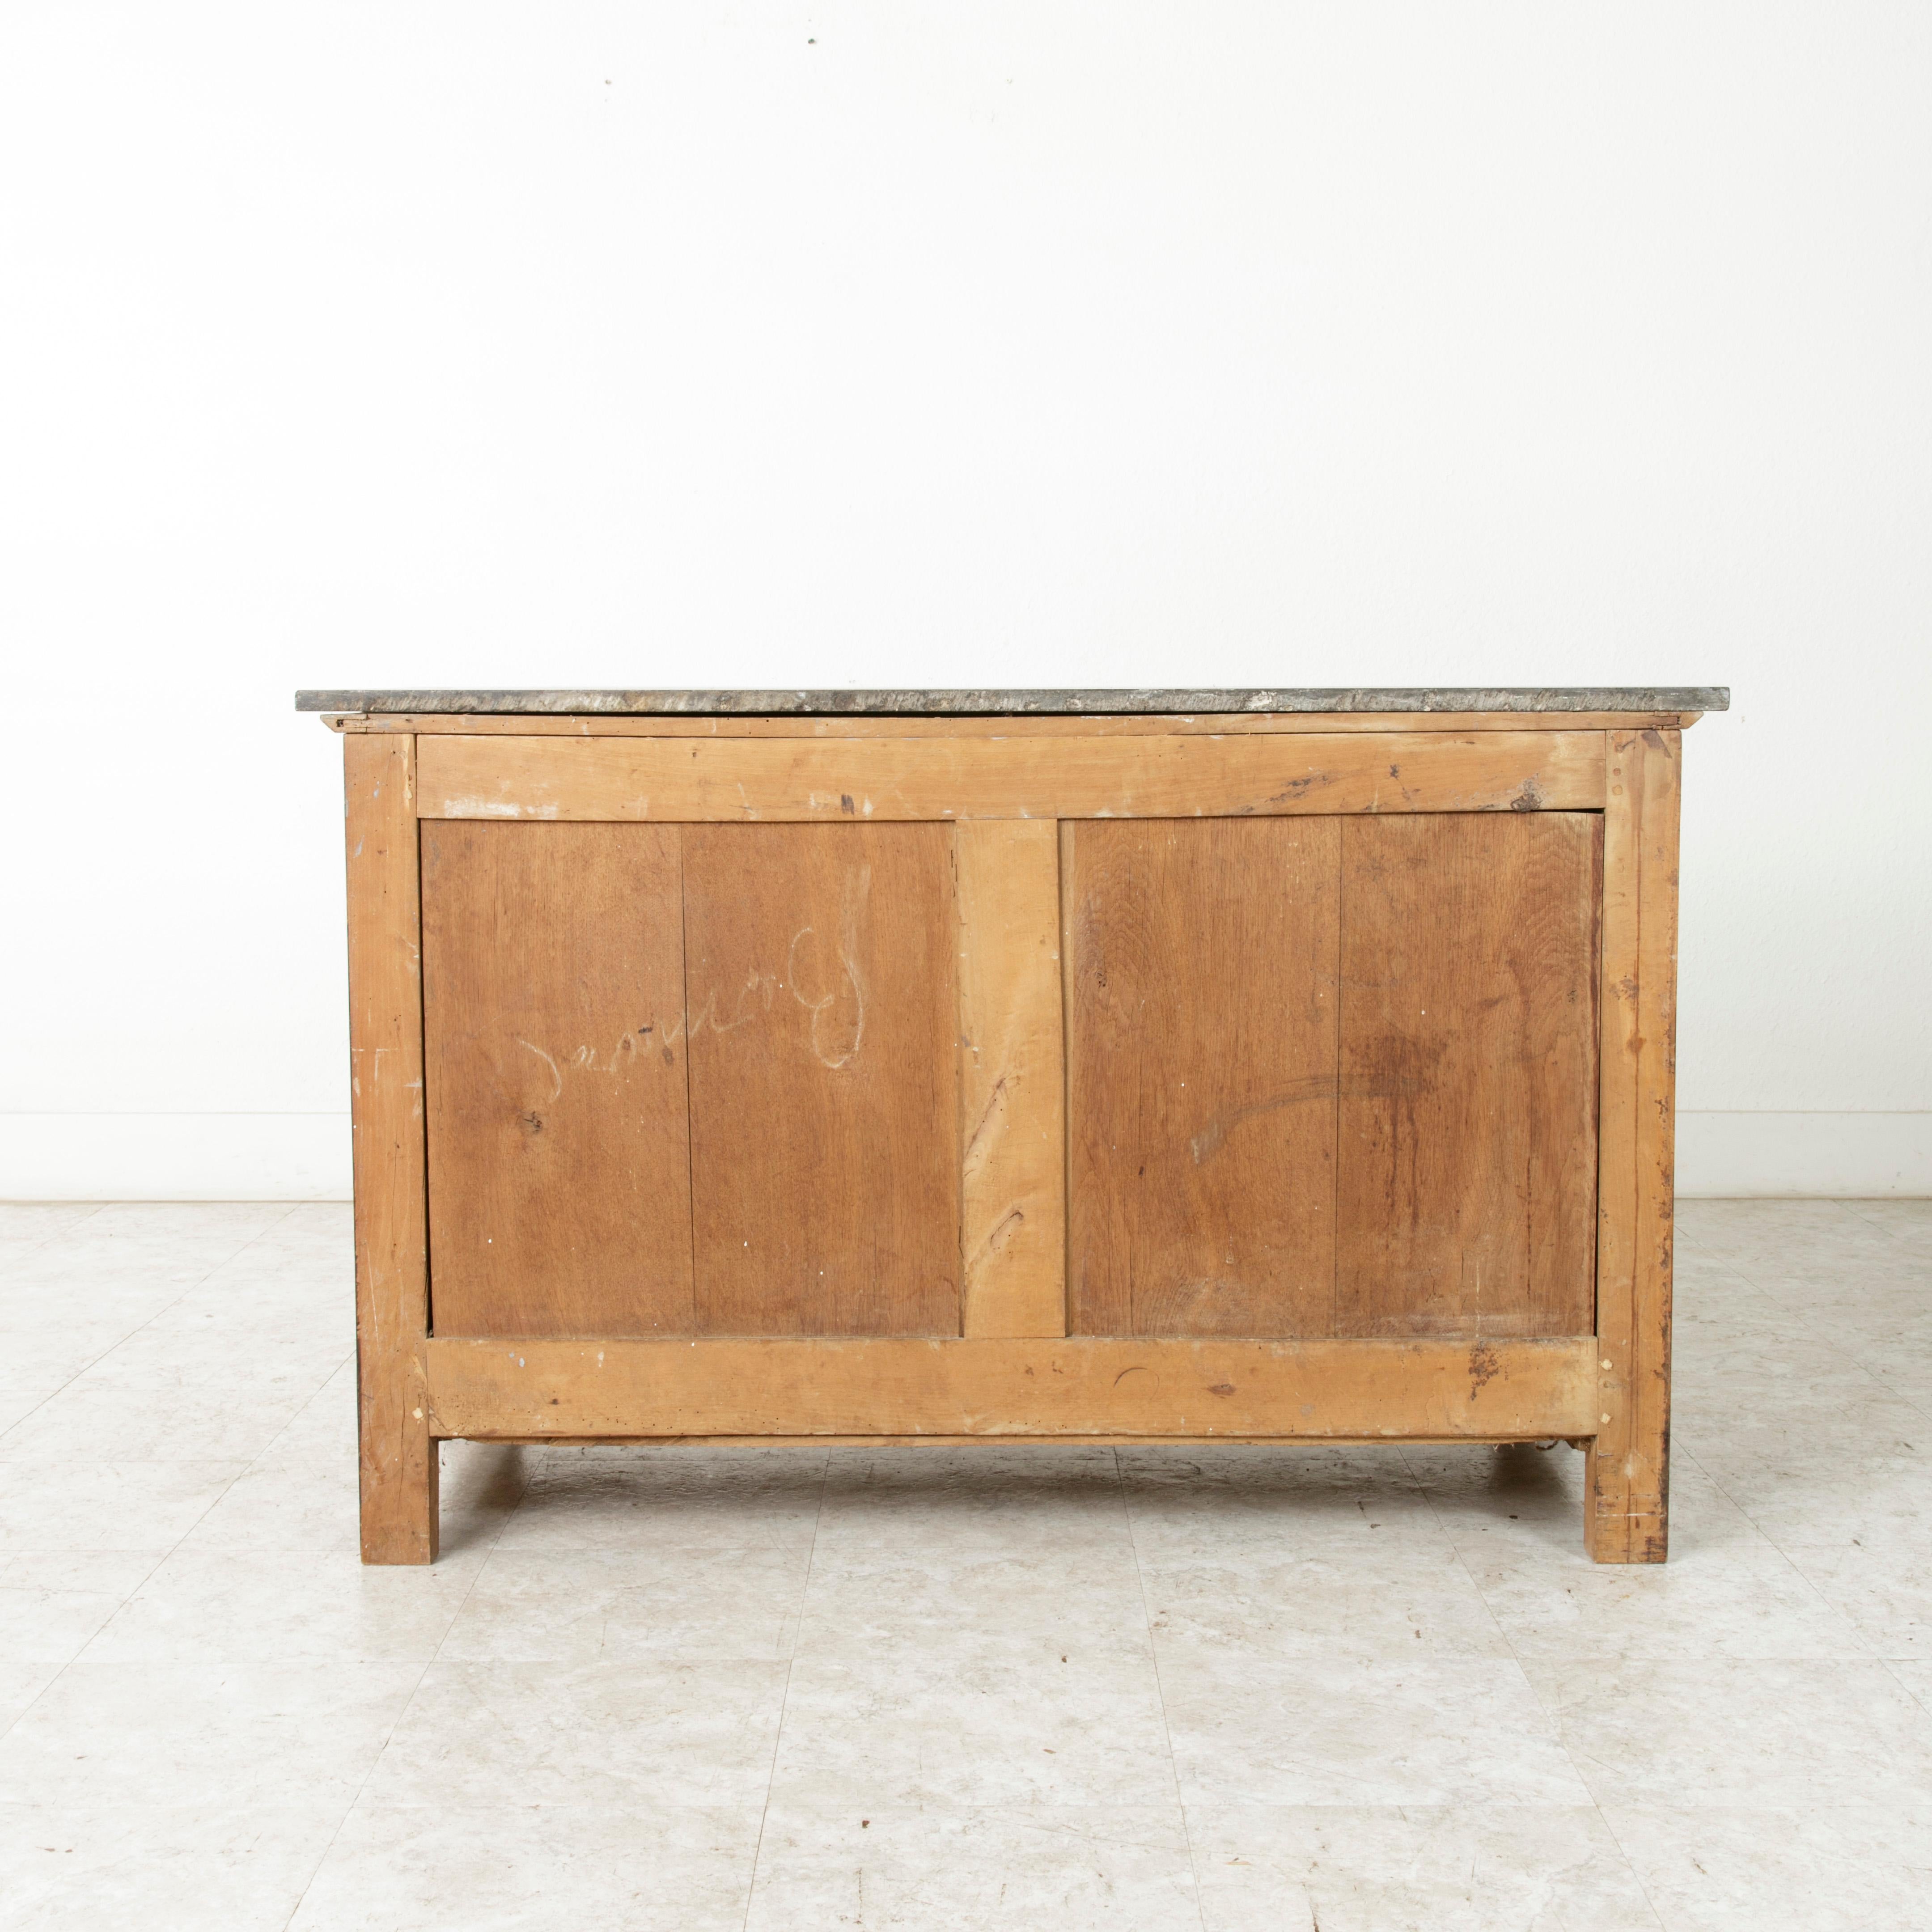 Late 19th Century French Empire Style Walnut Commode or Chest with Black Marble (19. Jahrhundert)